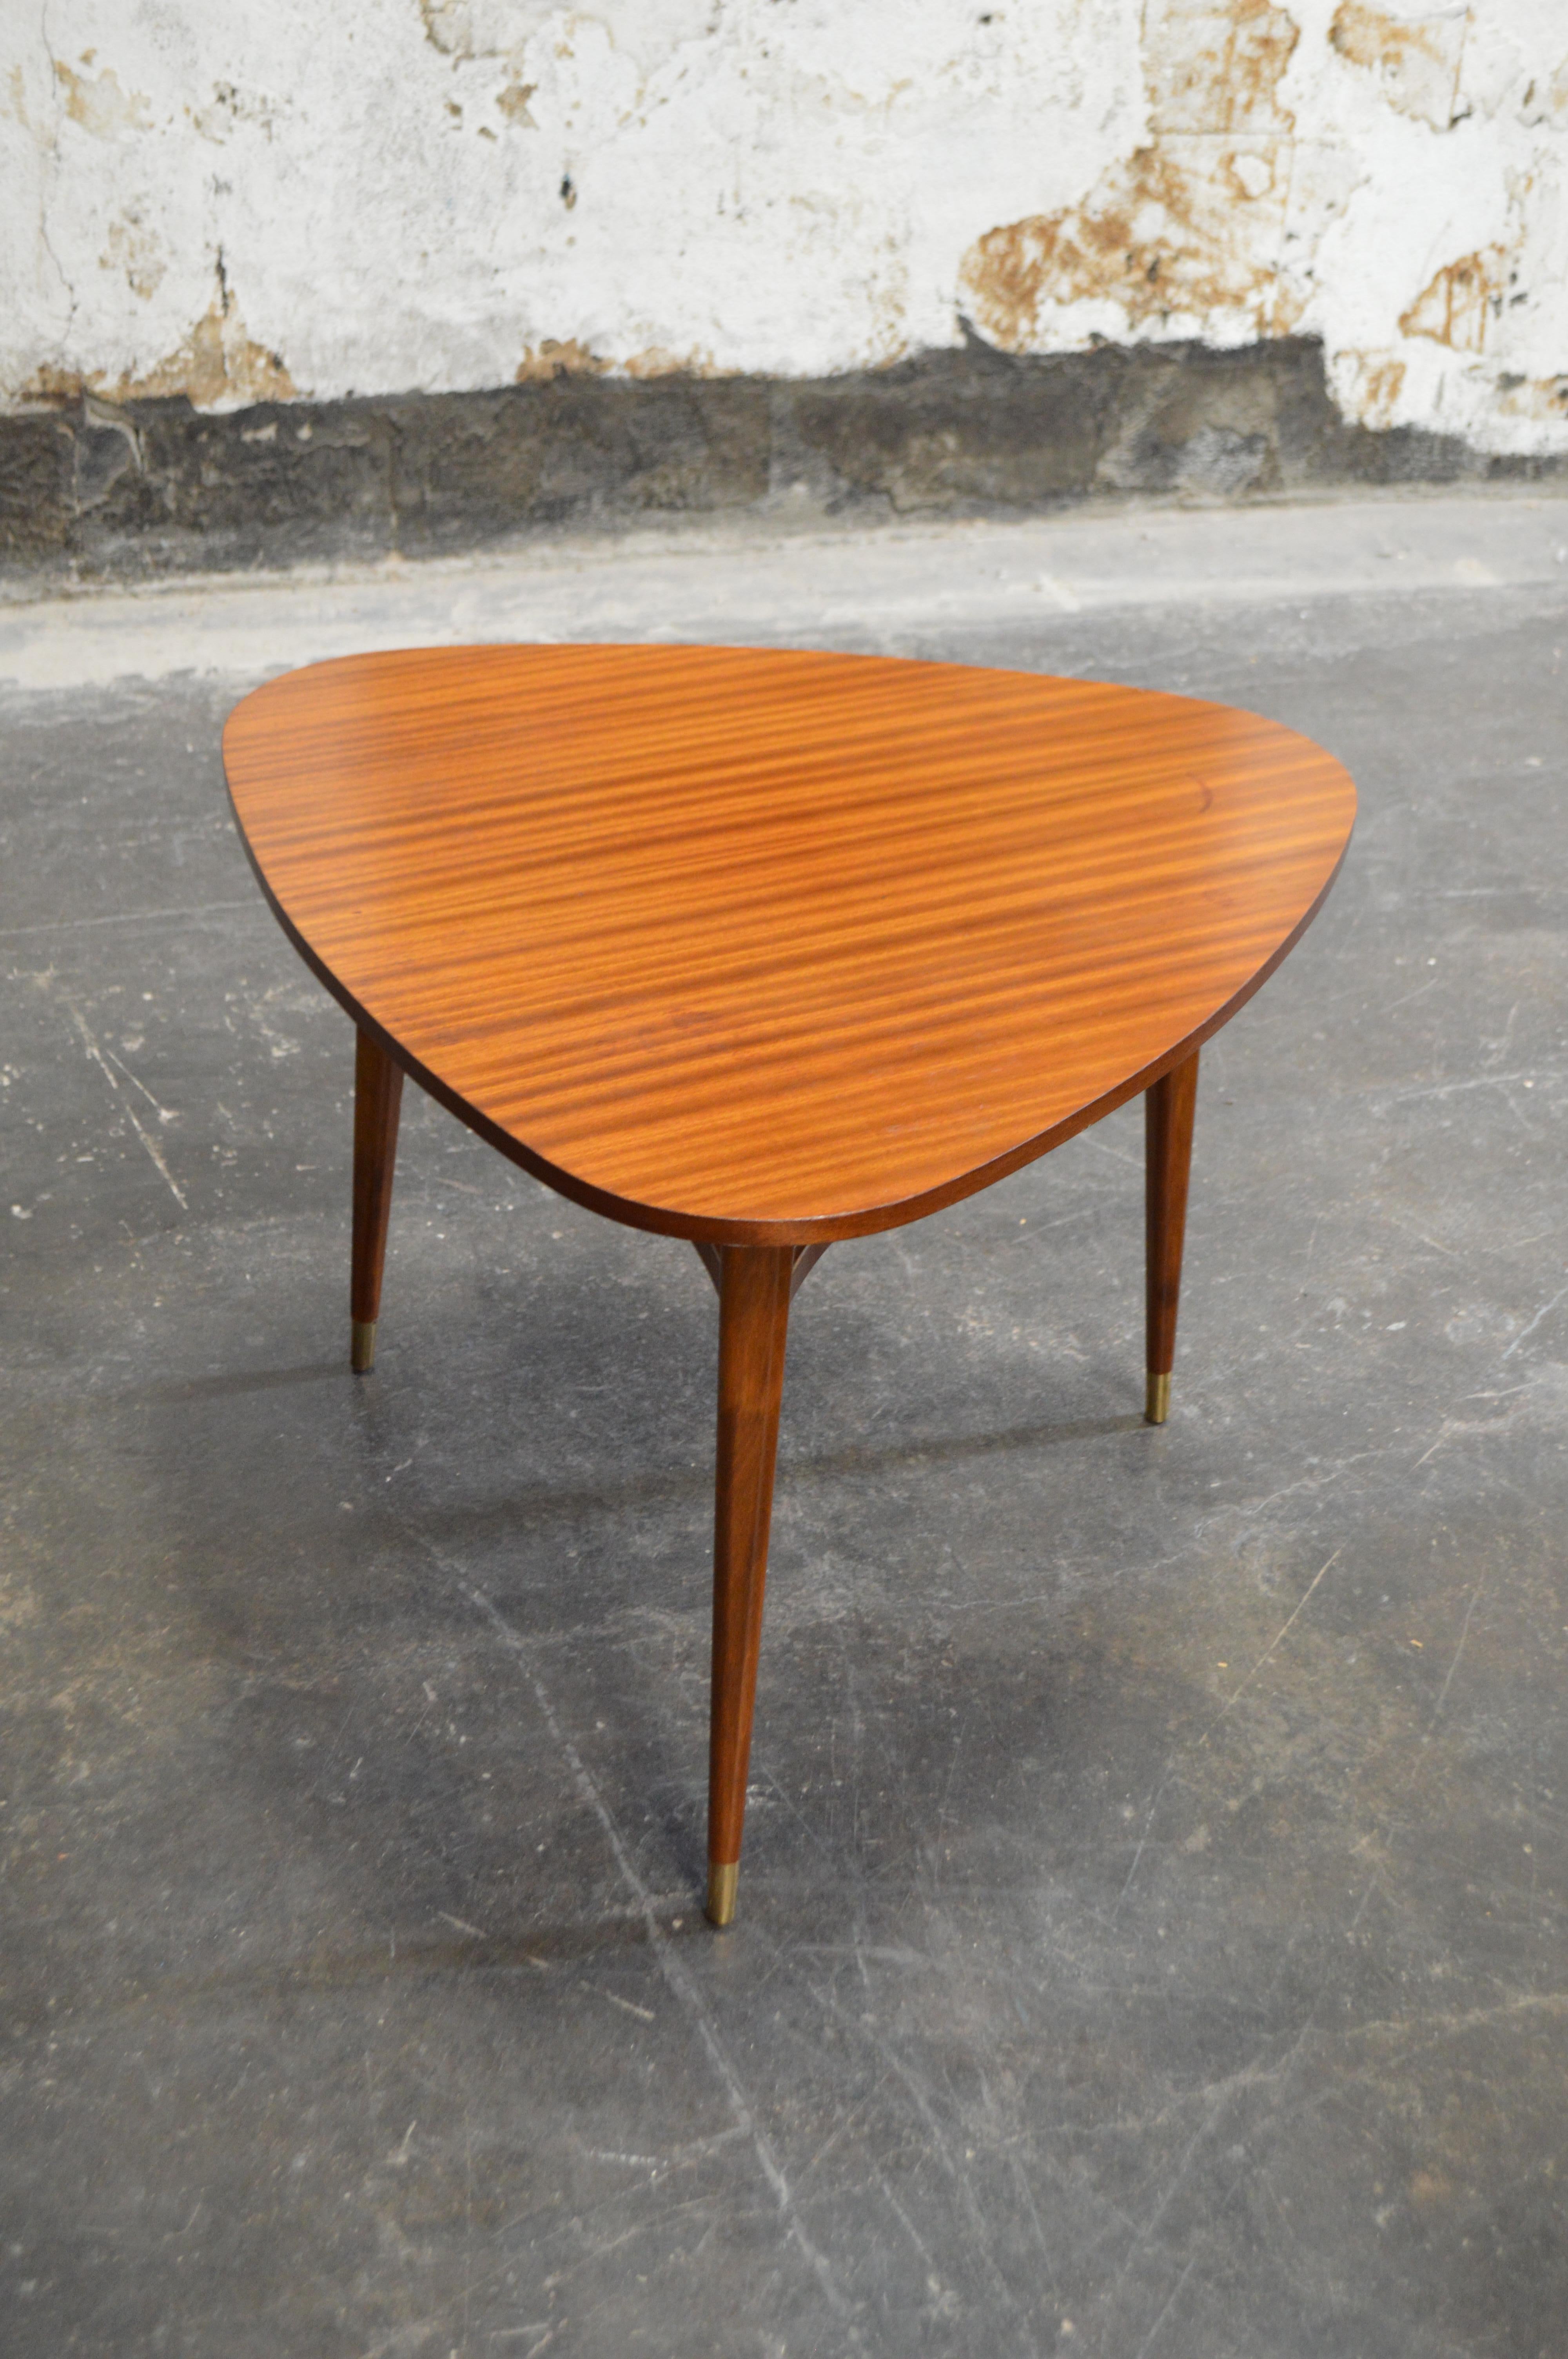 What a beauty! The perfect height and size side table for your sofa or a lounge chair, this tripod table features round tapered legs with brass sabots (some call them ferrule or caps, but doesn't sabot sound much more sophisticated?) and crafted of